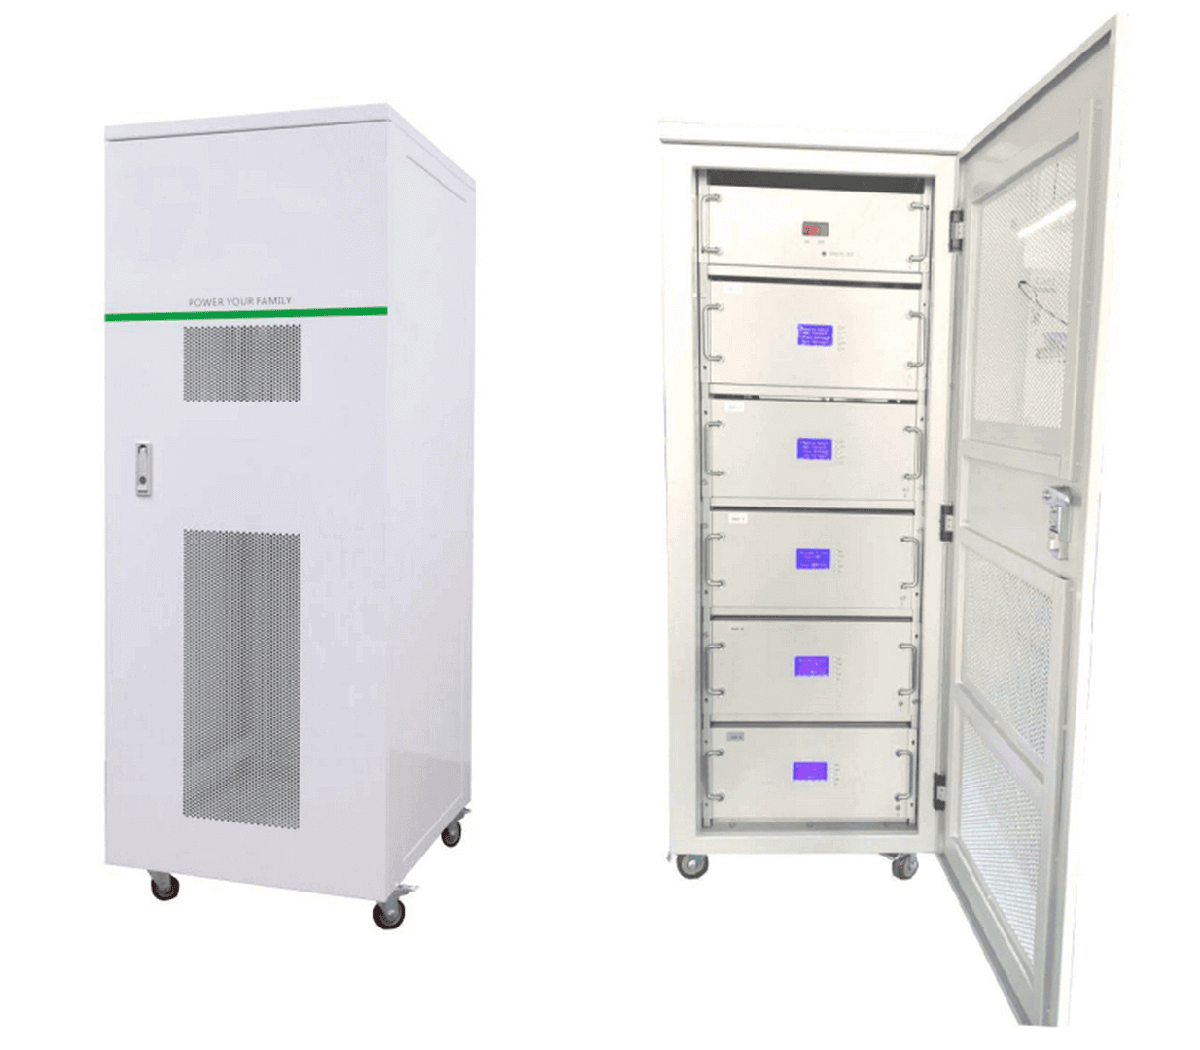 White model server rack - 5 lifepo4 storage batteries connection and cabinet